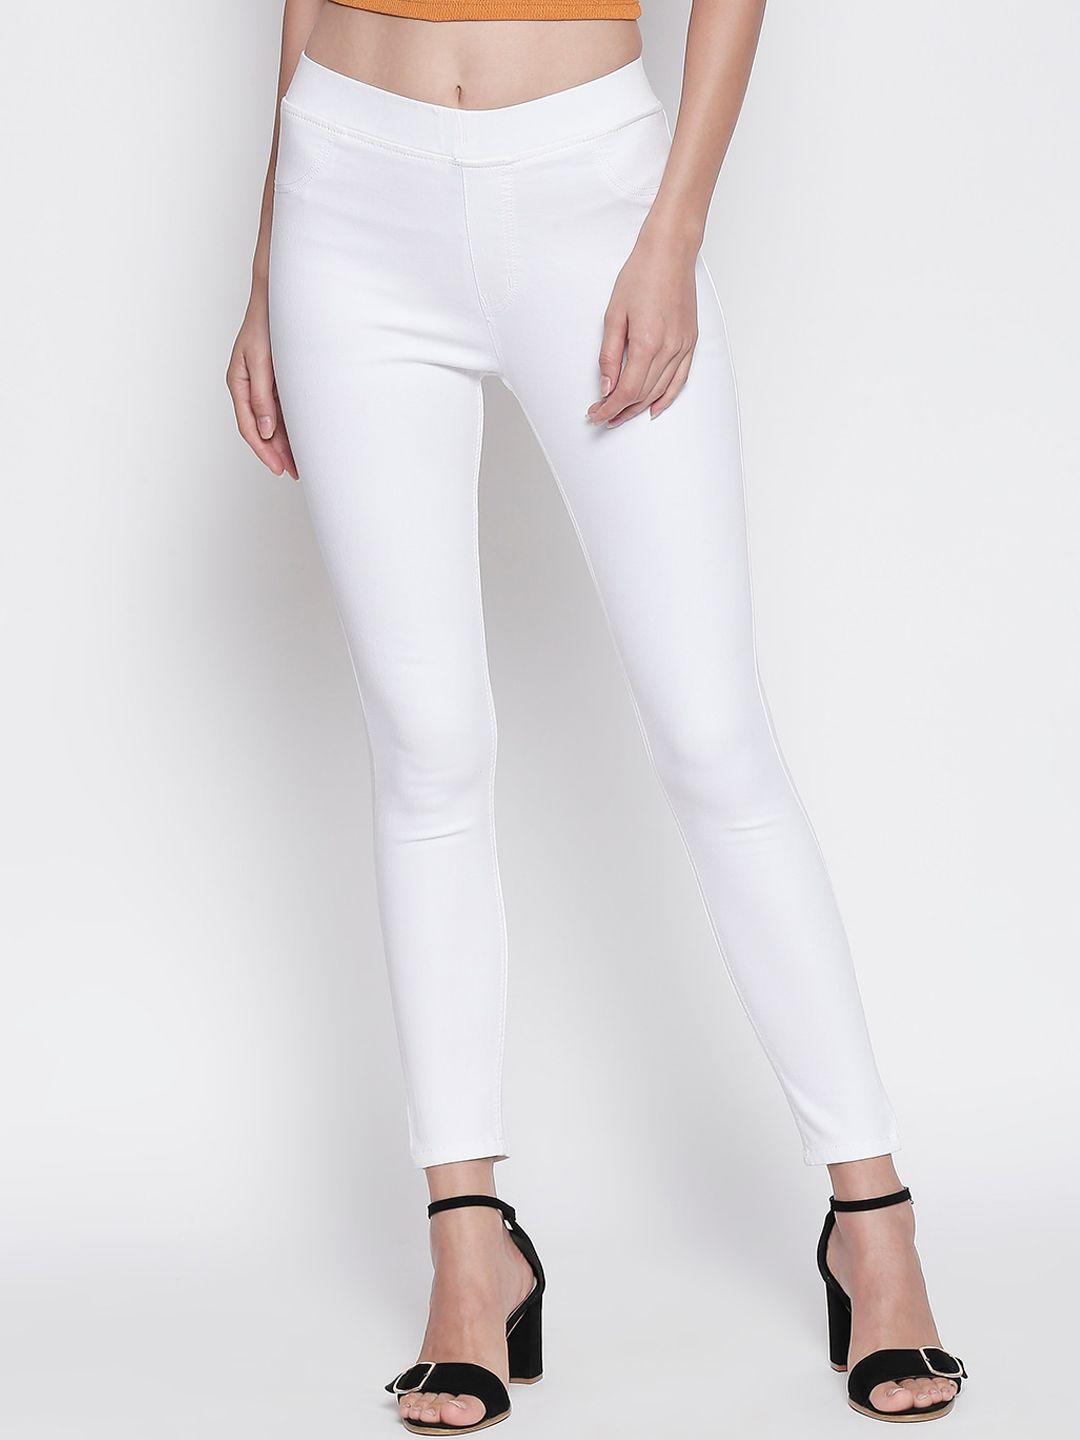 high-star-women-white-solid-stretchable-jeggings